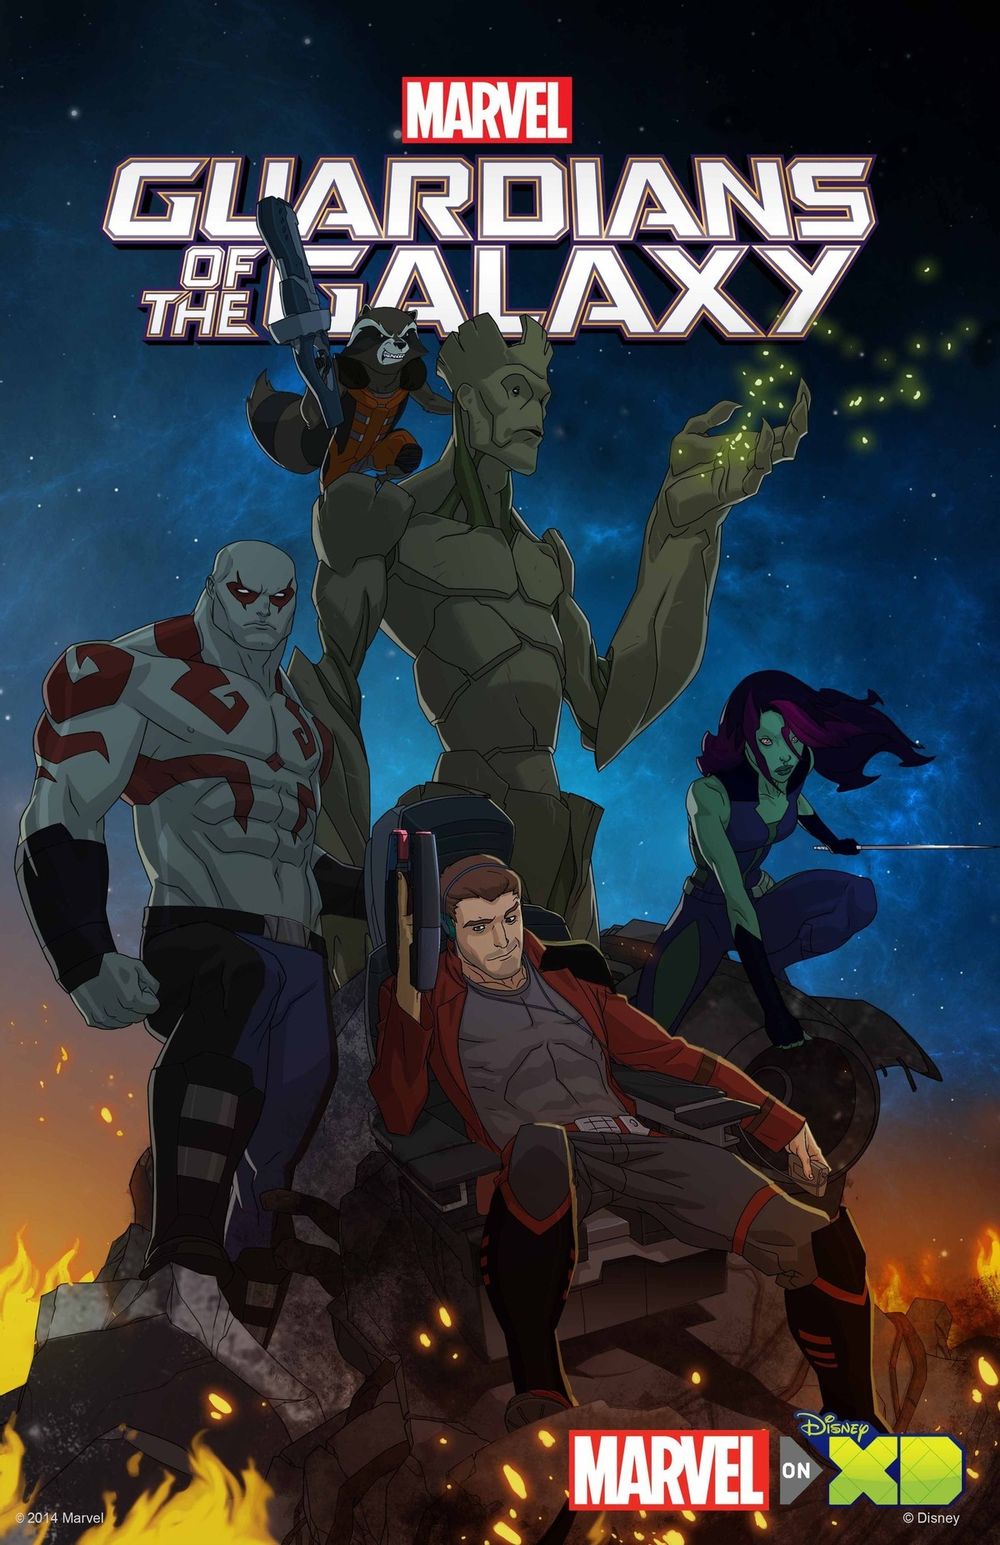 https://mediaproxy.tvtropes.org/width/1000/https://static.tvtropes.org/pmwiki/pub/images/guardians_of_the_galaxy_2015.jpg